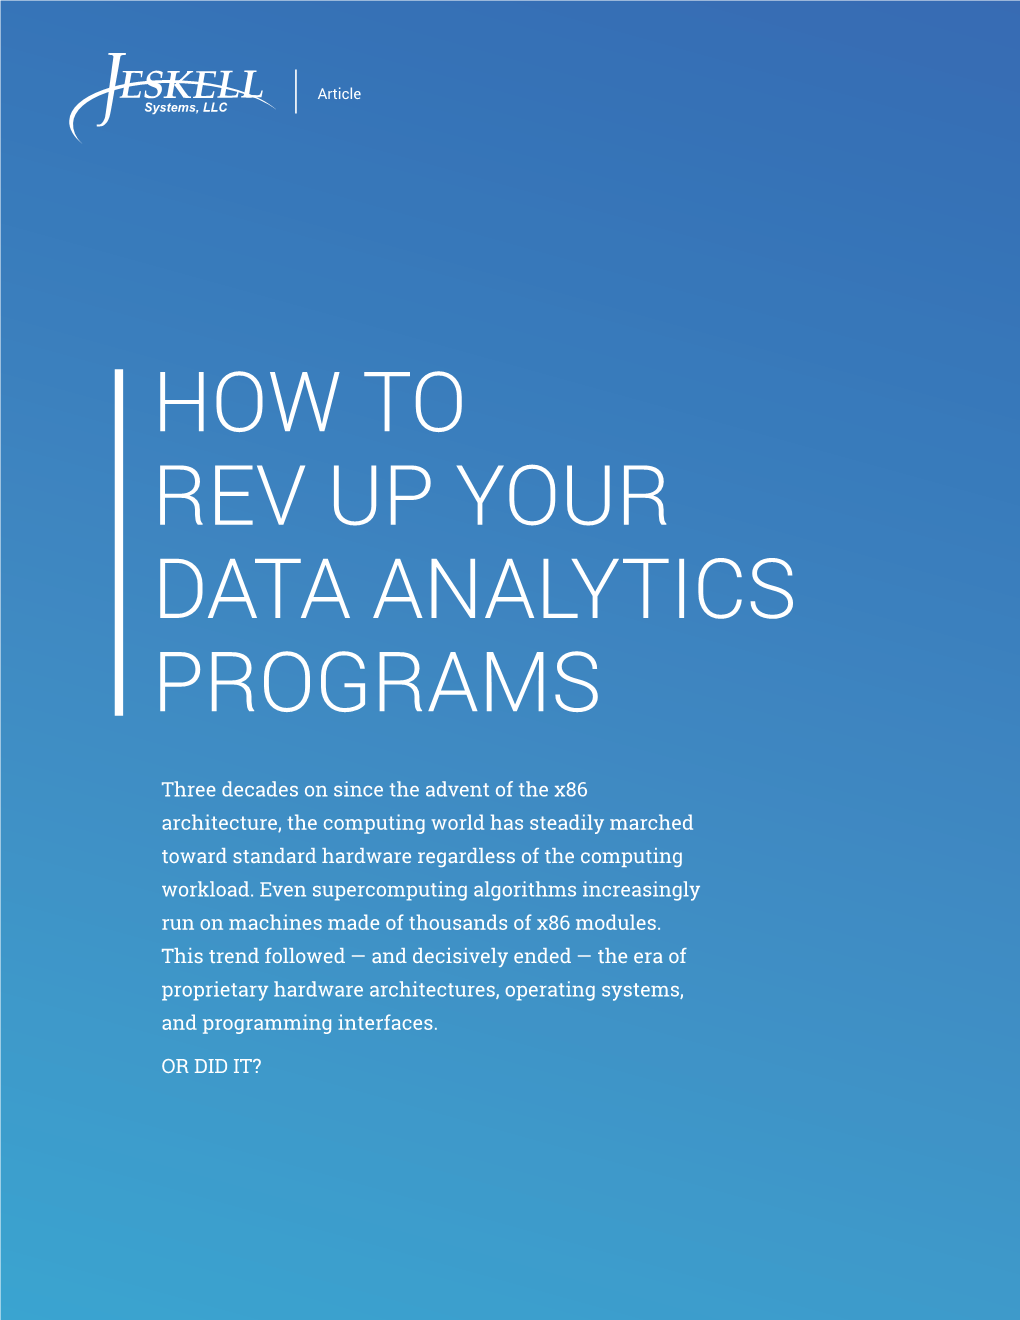 How to Rev up Your Data Analytics Programs